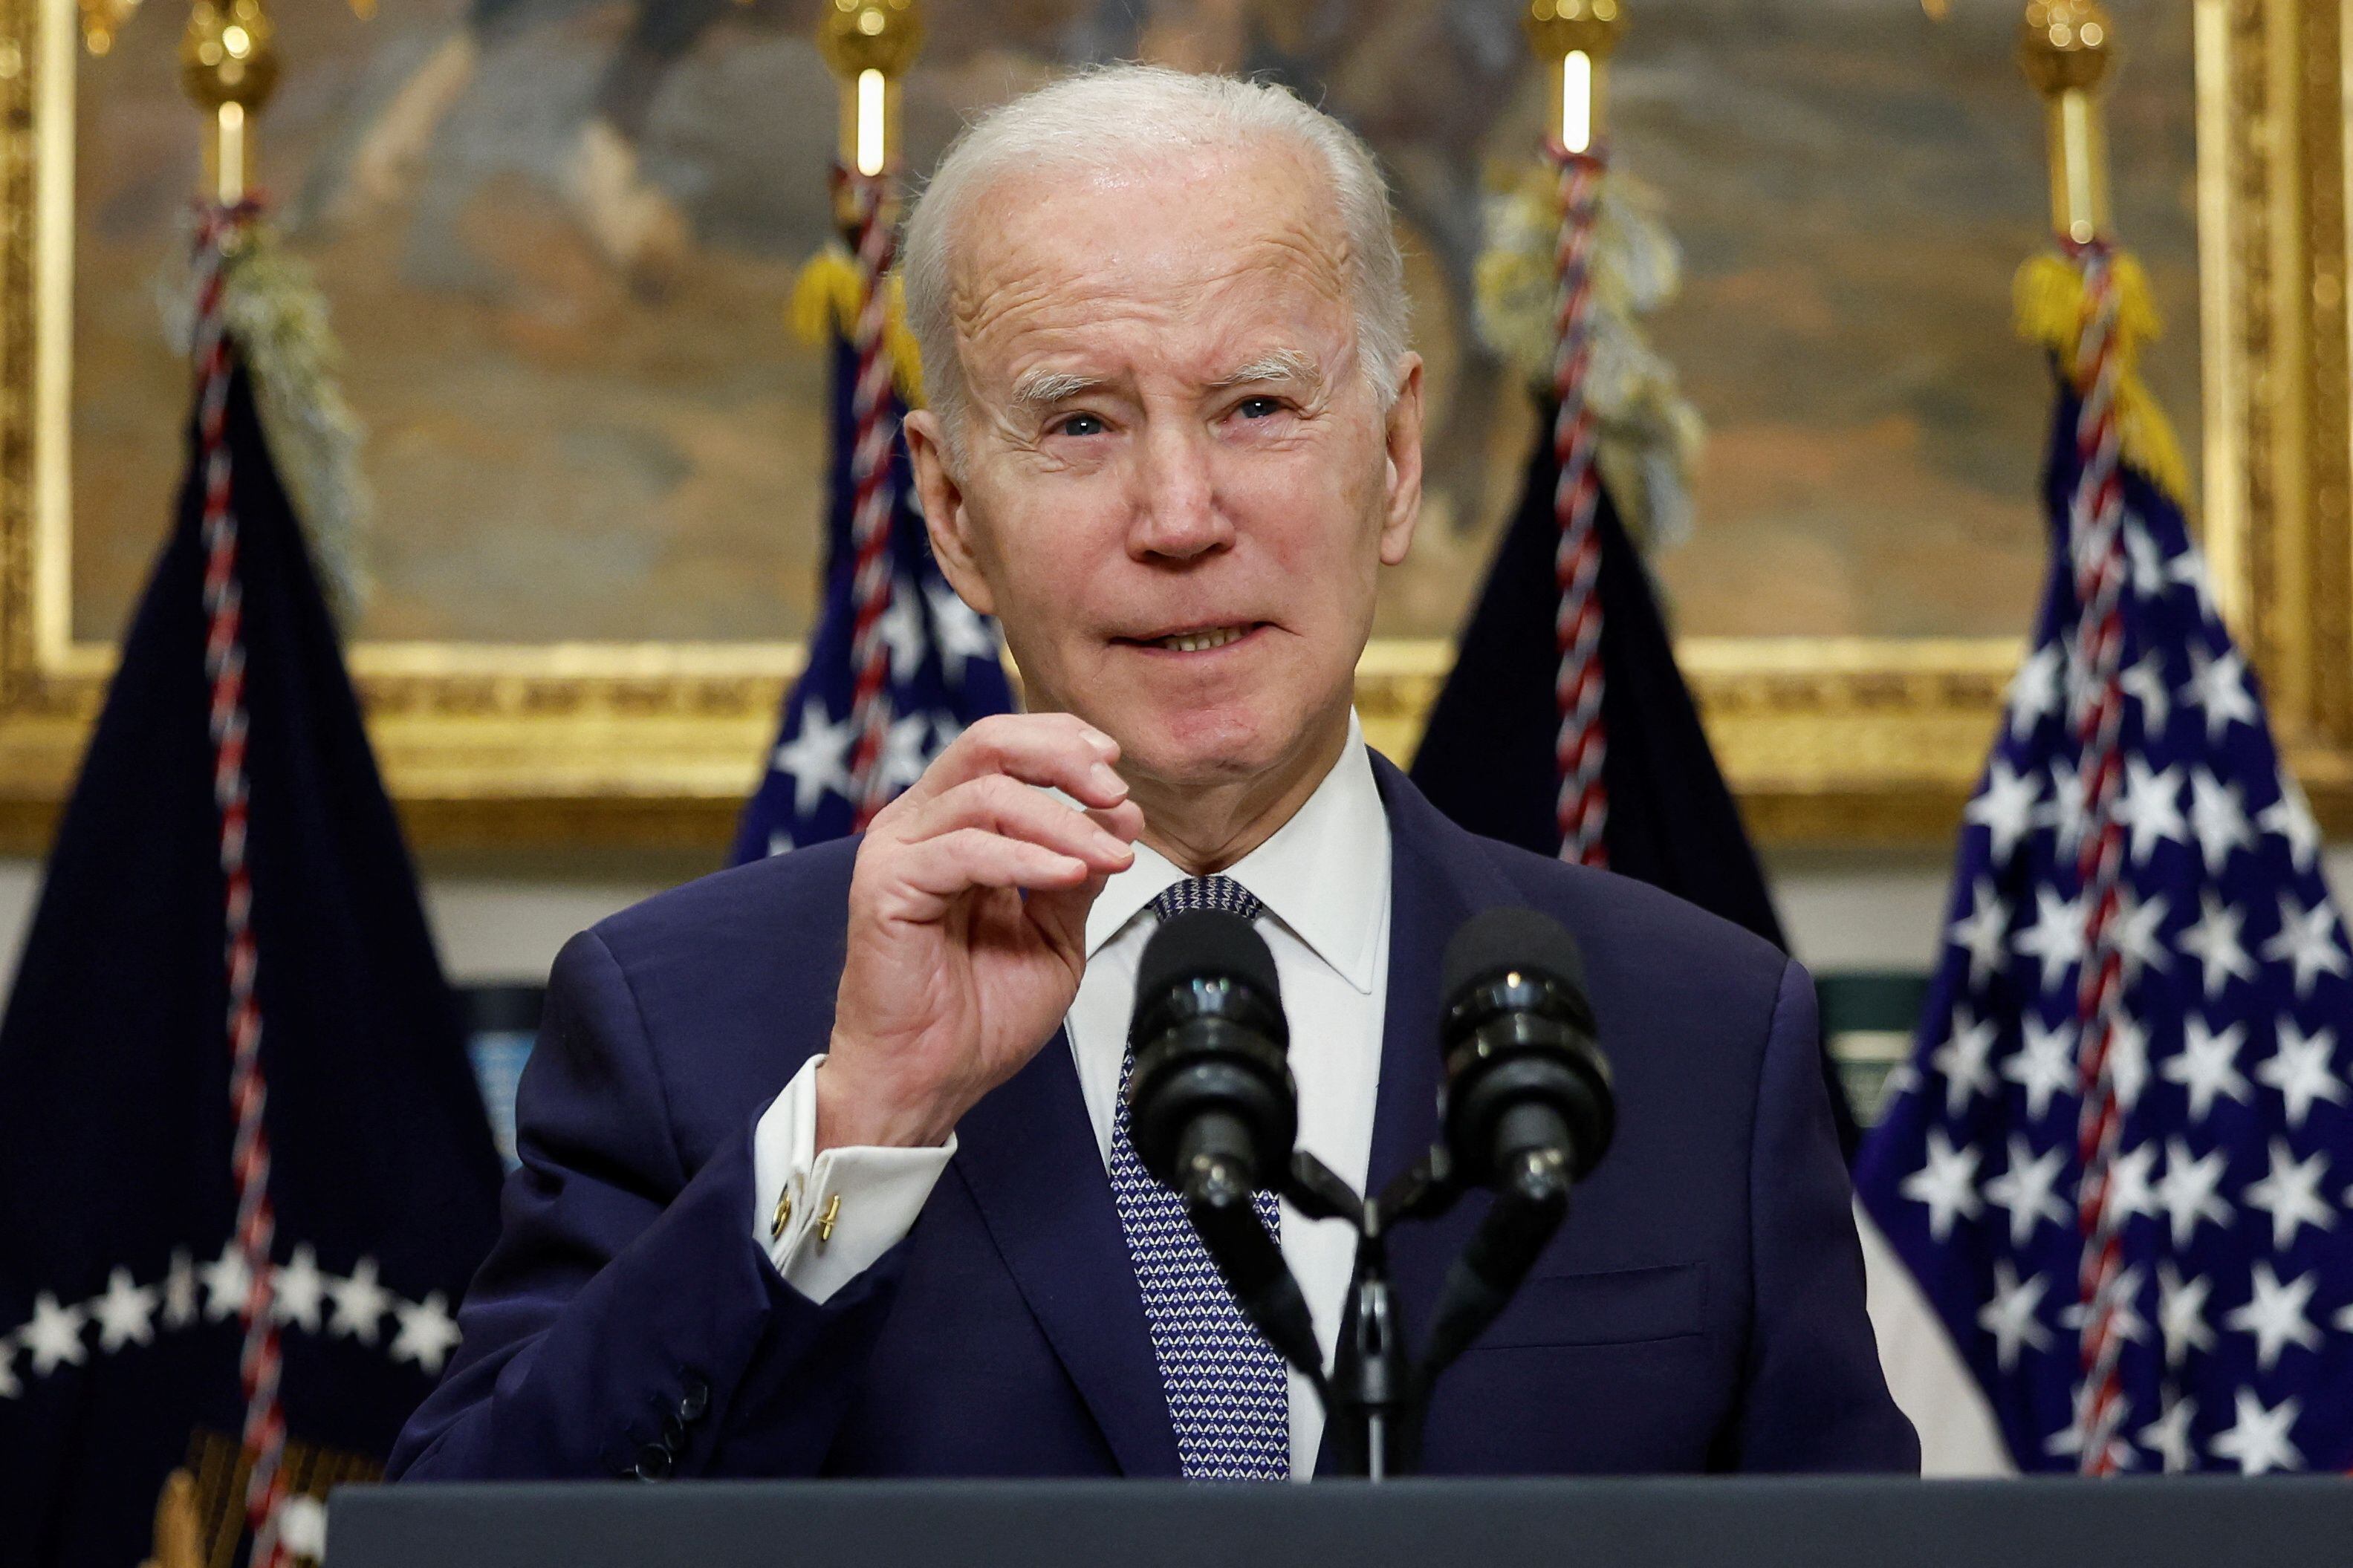 U.S. President Joe Biden delivers remarks on the banking crisis after the collapse of Silicon Valley Bank (SVB) and Signature Bank, in the Roosevelt Room at the White House in Washington, D.C., U.S. March 13, 2023. REUTERS/Evelyn Hockstein